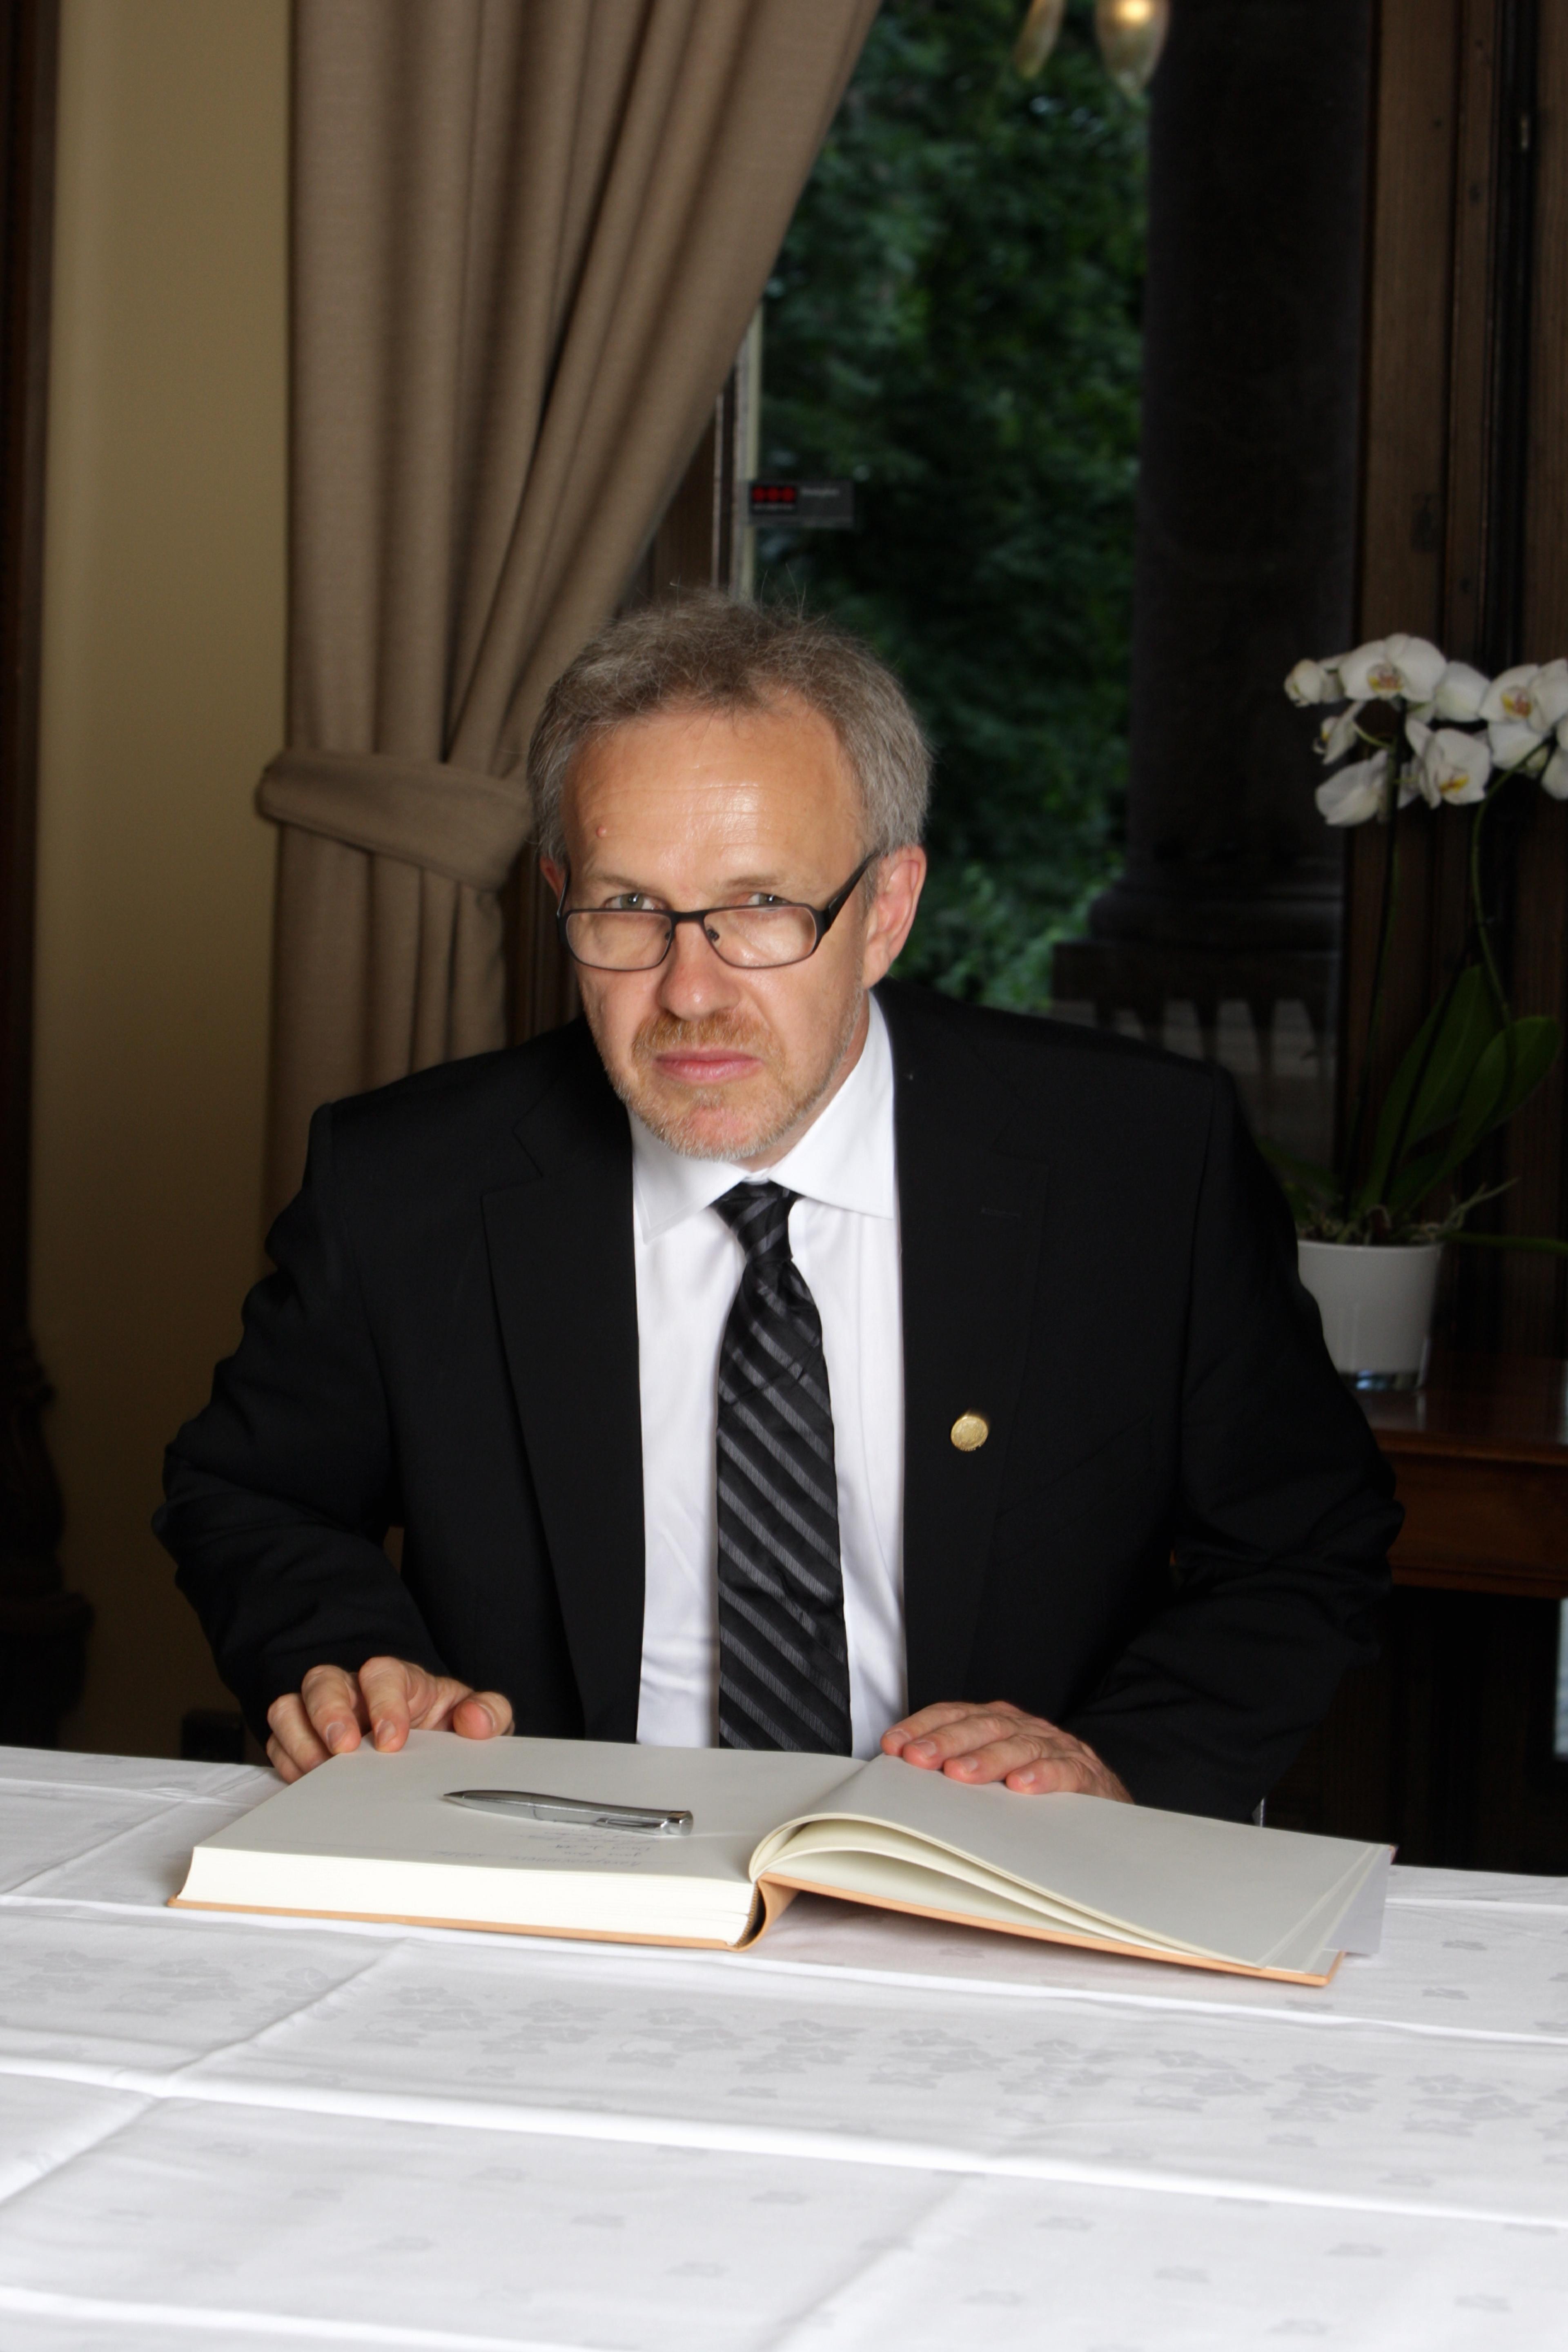 Winfried Denk signing the guest book at the Norwegian Academy of Science and Letters during the Kavli Prize week in Oslo